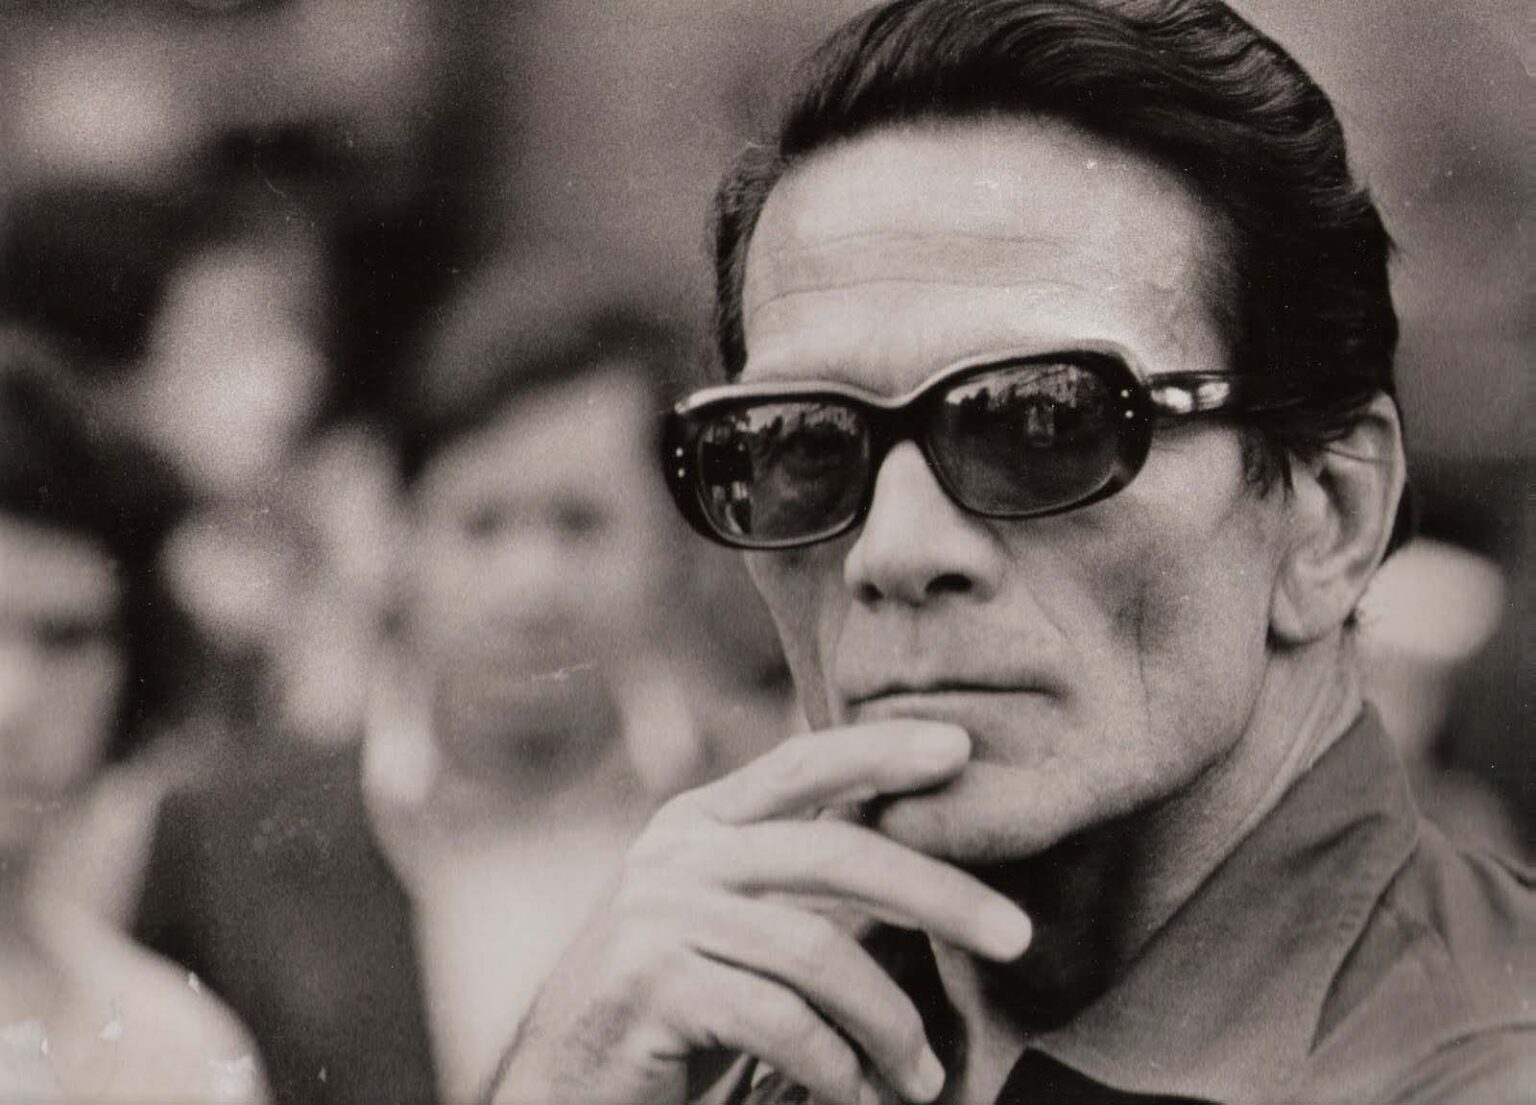 Pier Paolo Pasolini made beautiful films like 'Arabian Nights' and 'The Canterbury Tales', but his messages of anti-fascism made him a target.